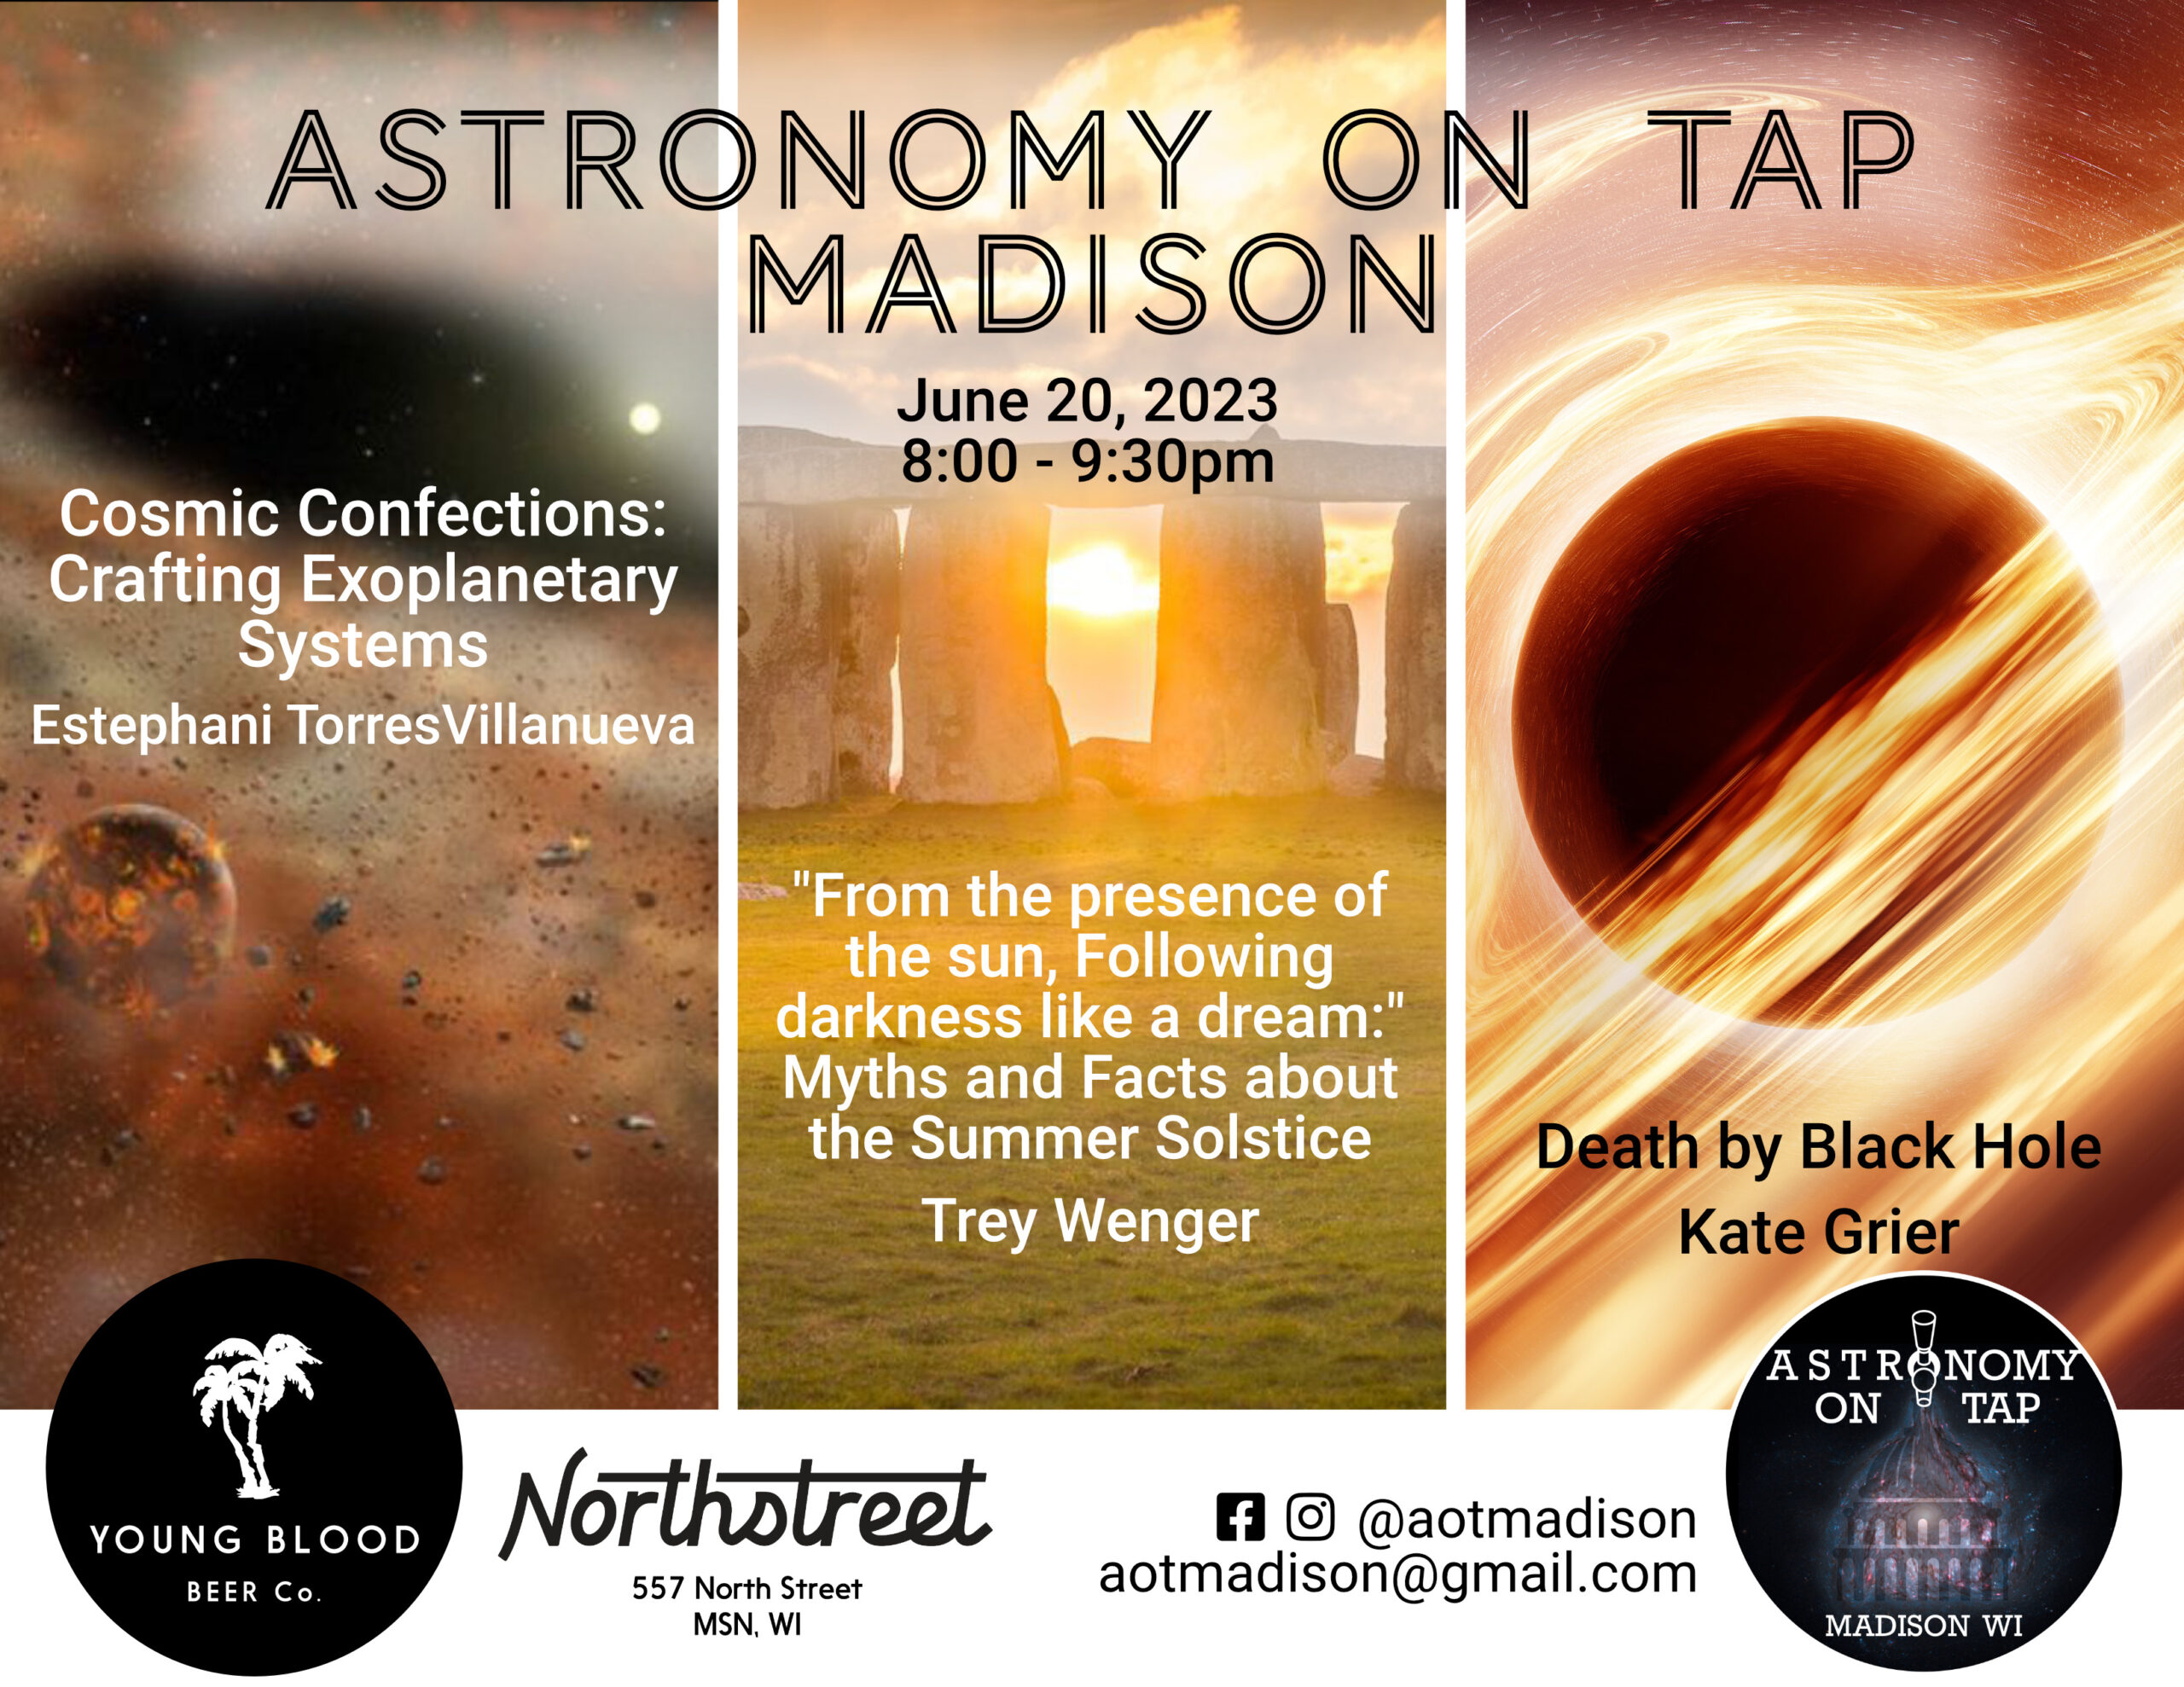 Title: Astronomy on Tap Madison June 20th, 2023 8-9:30pm at the top of the image. Background shows three panels with the talk descriptions showing a protoplanetary disk forming, a solstice sunrise at Stonehenge, and a artist rendition of a black hole. At bottom is the Youngblood Brewing logo with a white tree at center of a black background and the Northstreet logo and the AoT Madison logo.